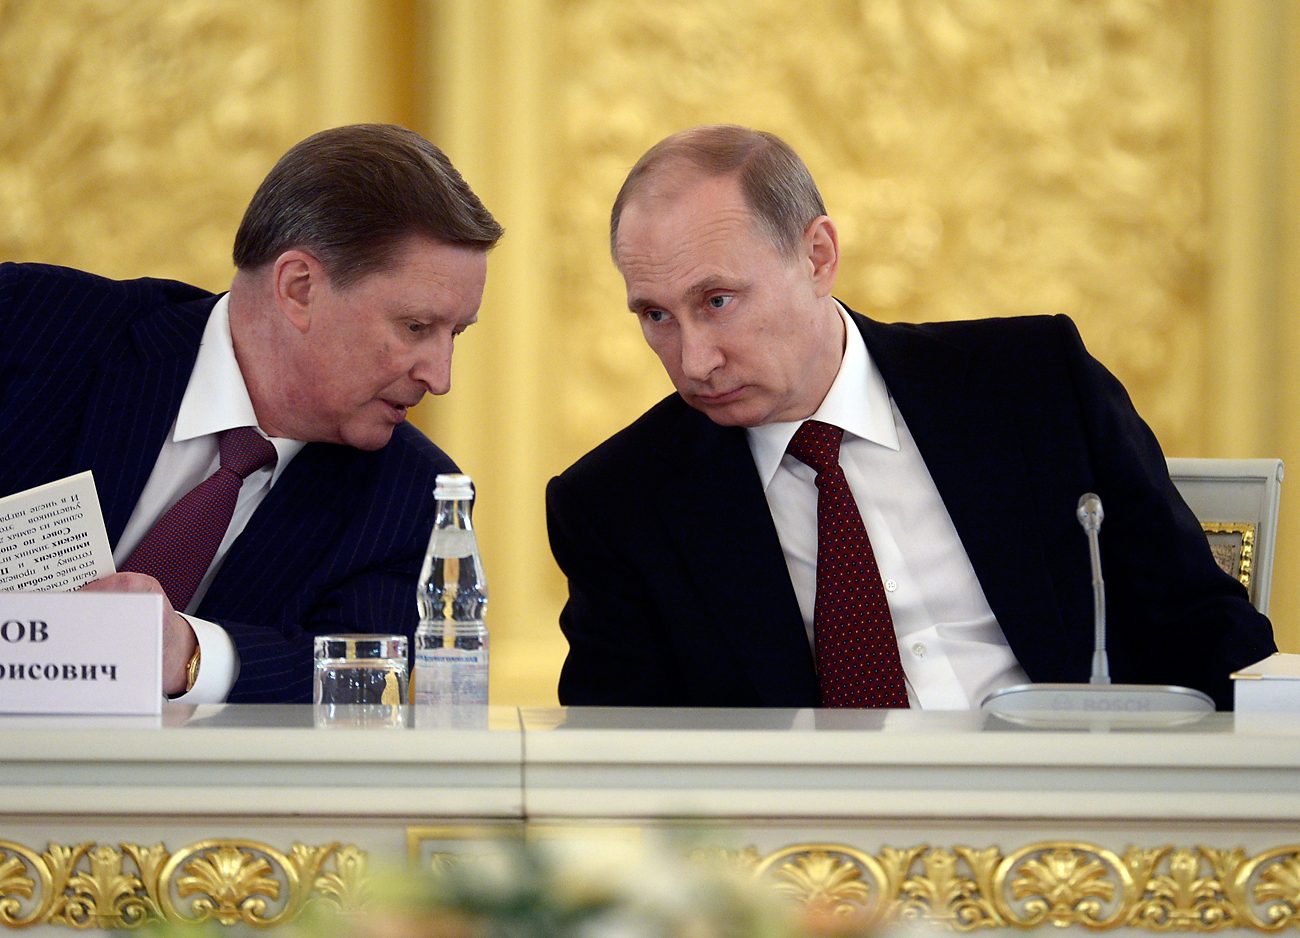 Russian President Vladimir Putin speaks with Sergei Ivanov, head of the presidential administration, during a government meeting in Moscow's Kremlin on March 24, 2014.